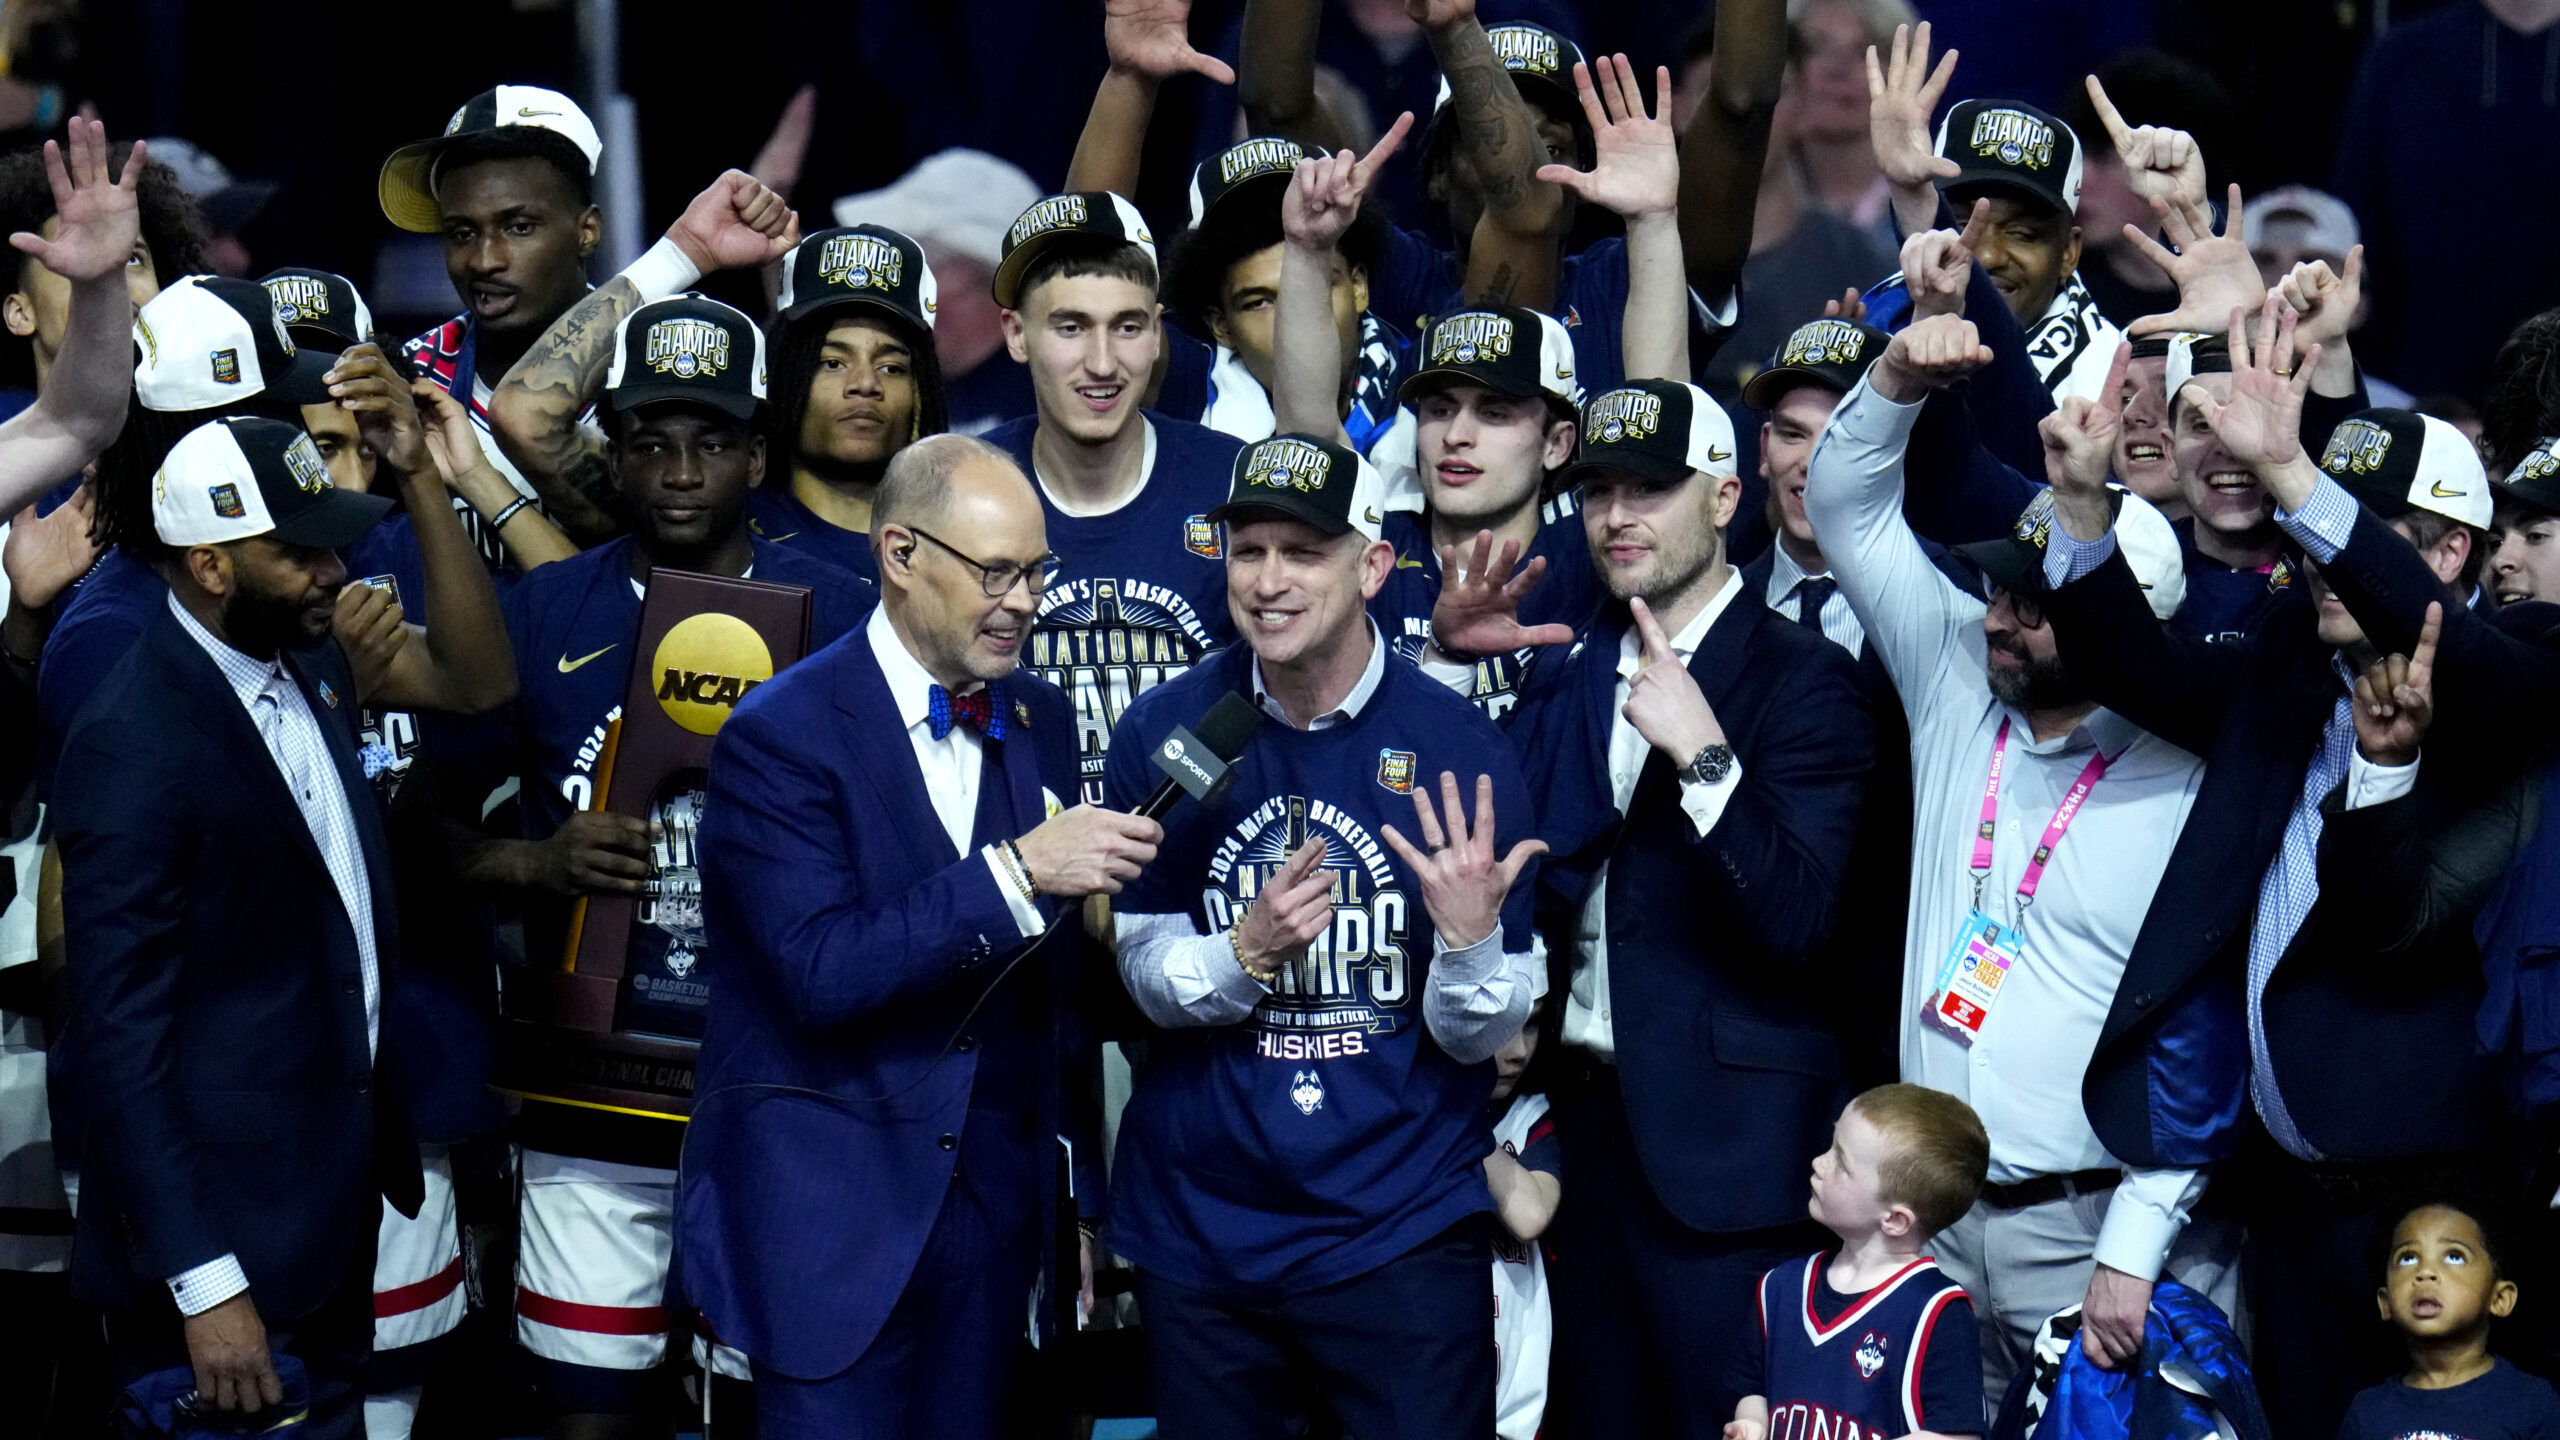 UConn head coach Dan Hurley, center, and his players celebrate after the NCAA college Final Four ch...